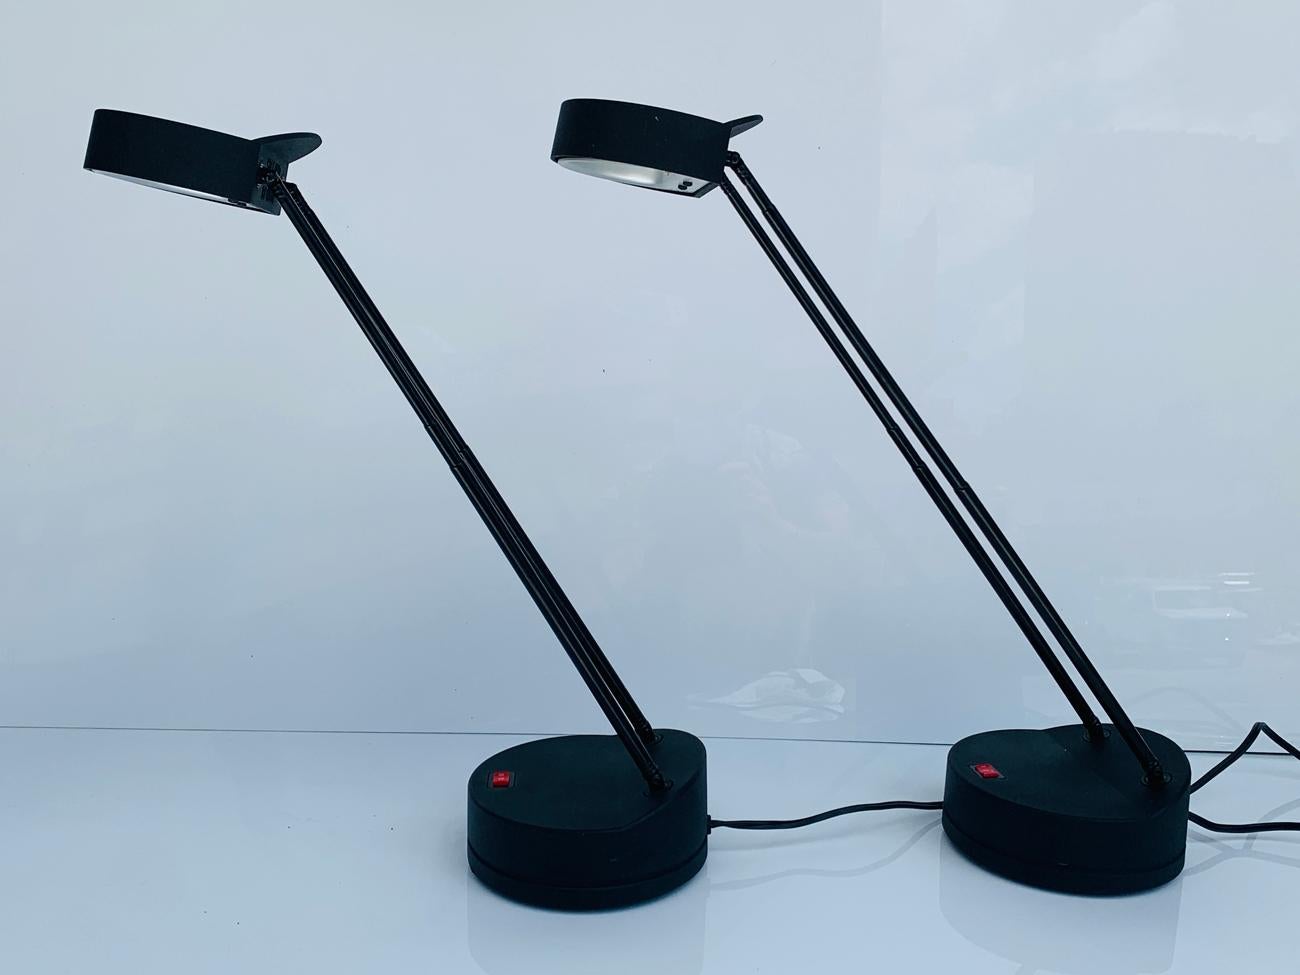 Beautiful and modern pair of telescoping and height adjustable table/reading lamps designed and manufactured in Italy by Stephano Cevoli and manufactured by Vermezzo as part of the Spoiler collection.

These lamps feature a round base and a double